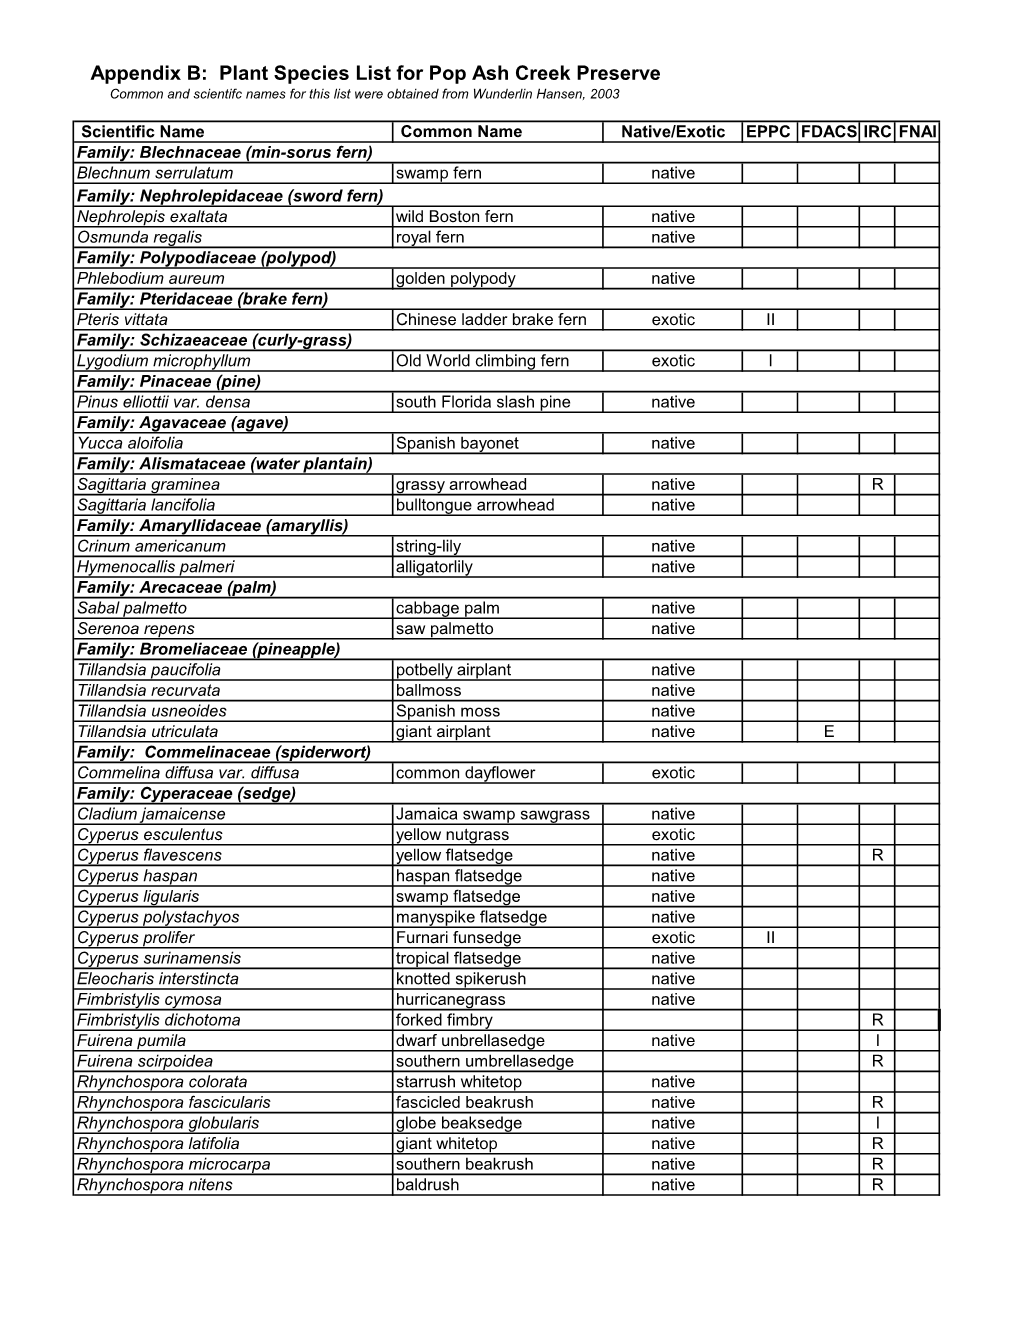 Appendix B: Plant Species List for Pop Ash Creek Preserve Common and Scientifc Names for This List Were Obtained from Wunderlin Hansen, 2003